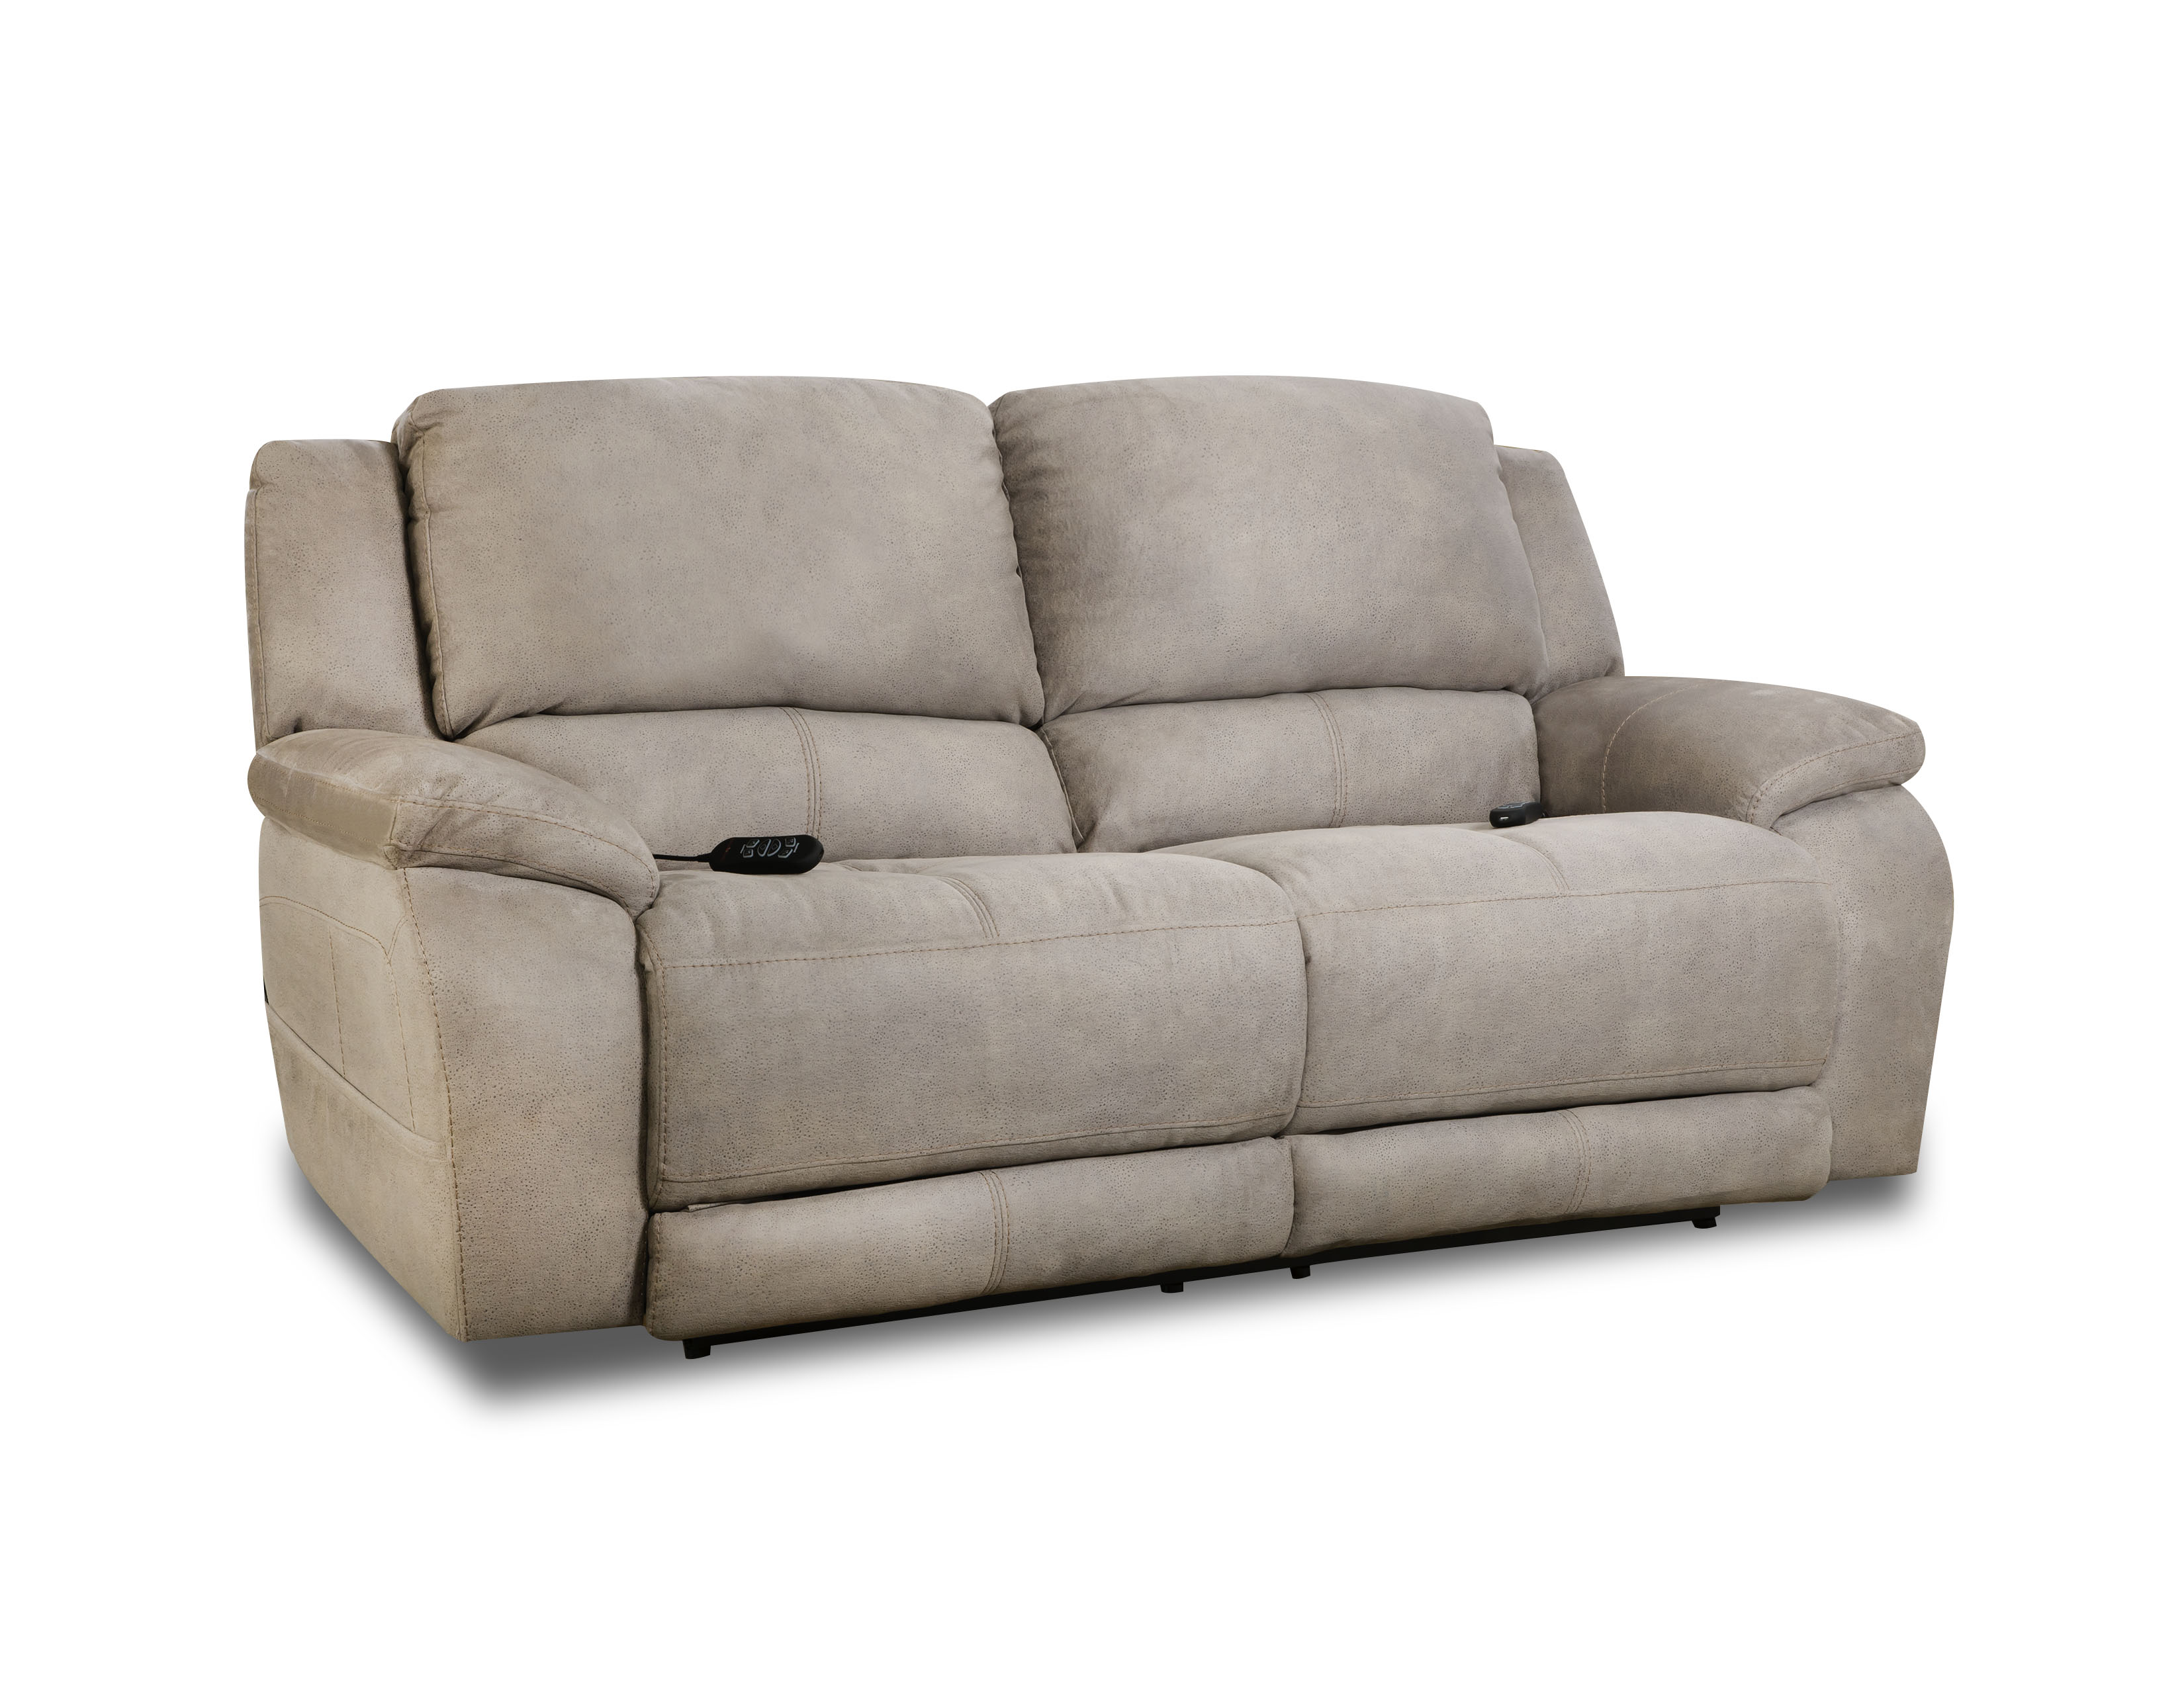 Homestretch Upholstered Power Reclining Sofa